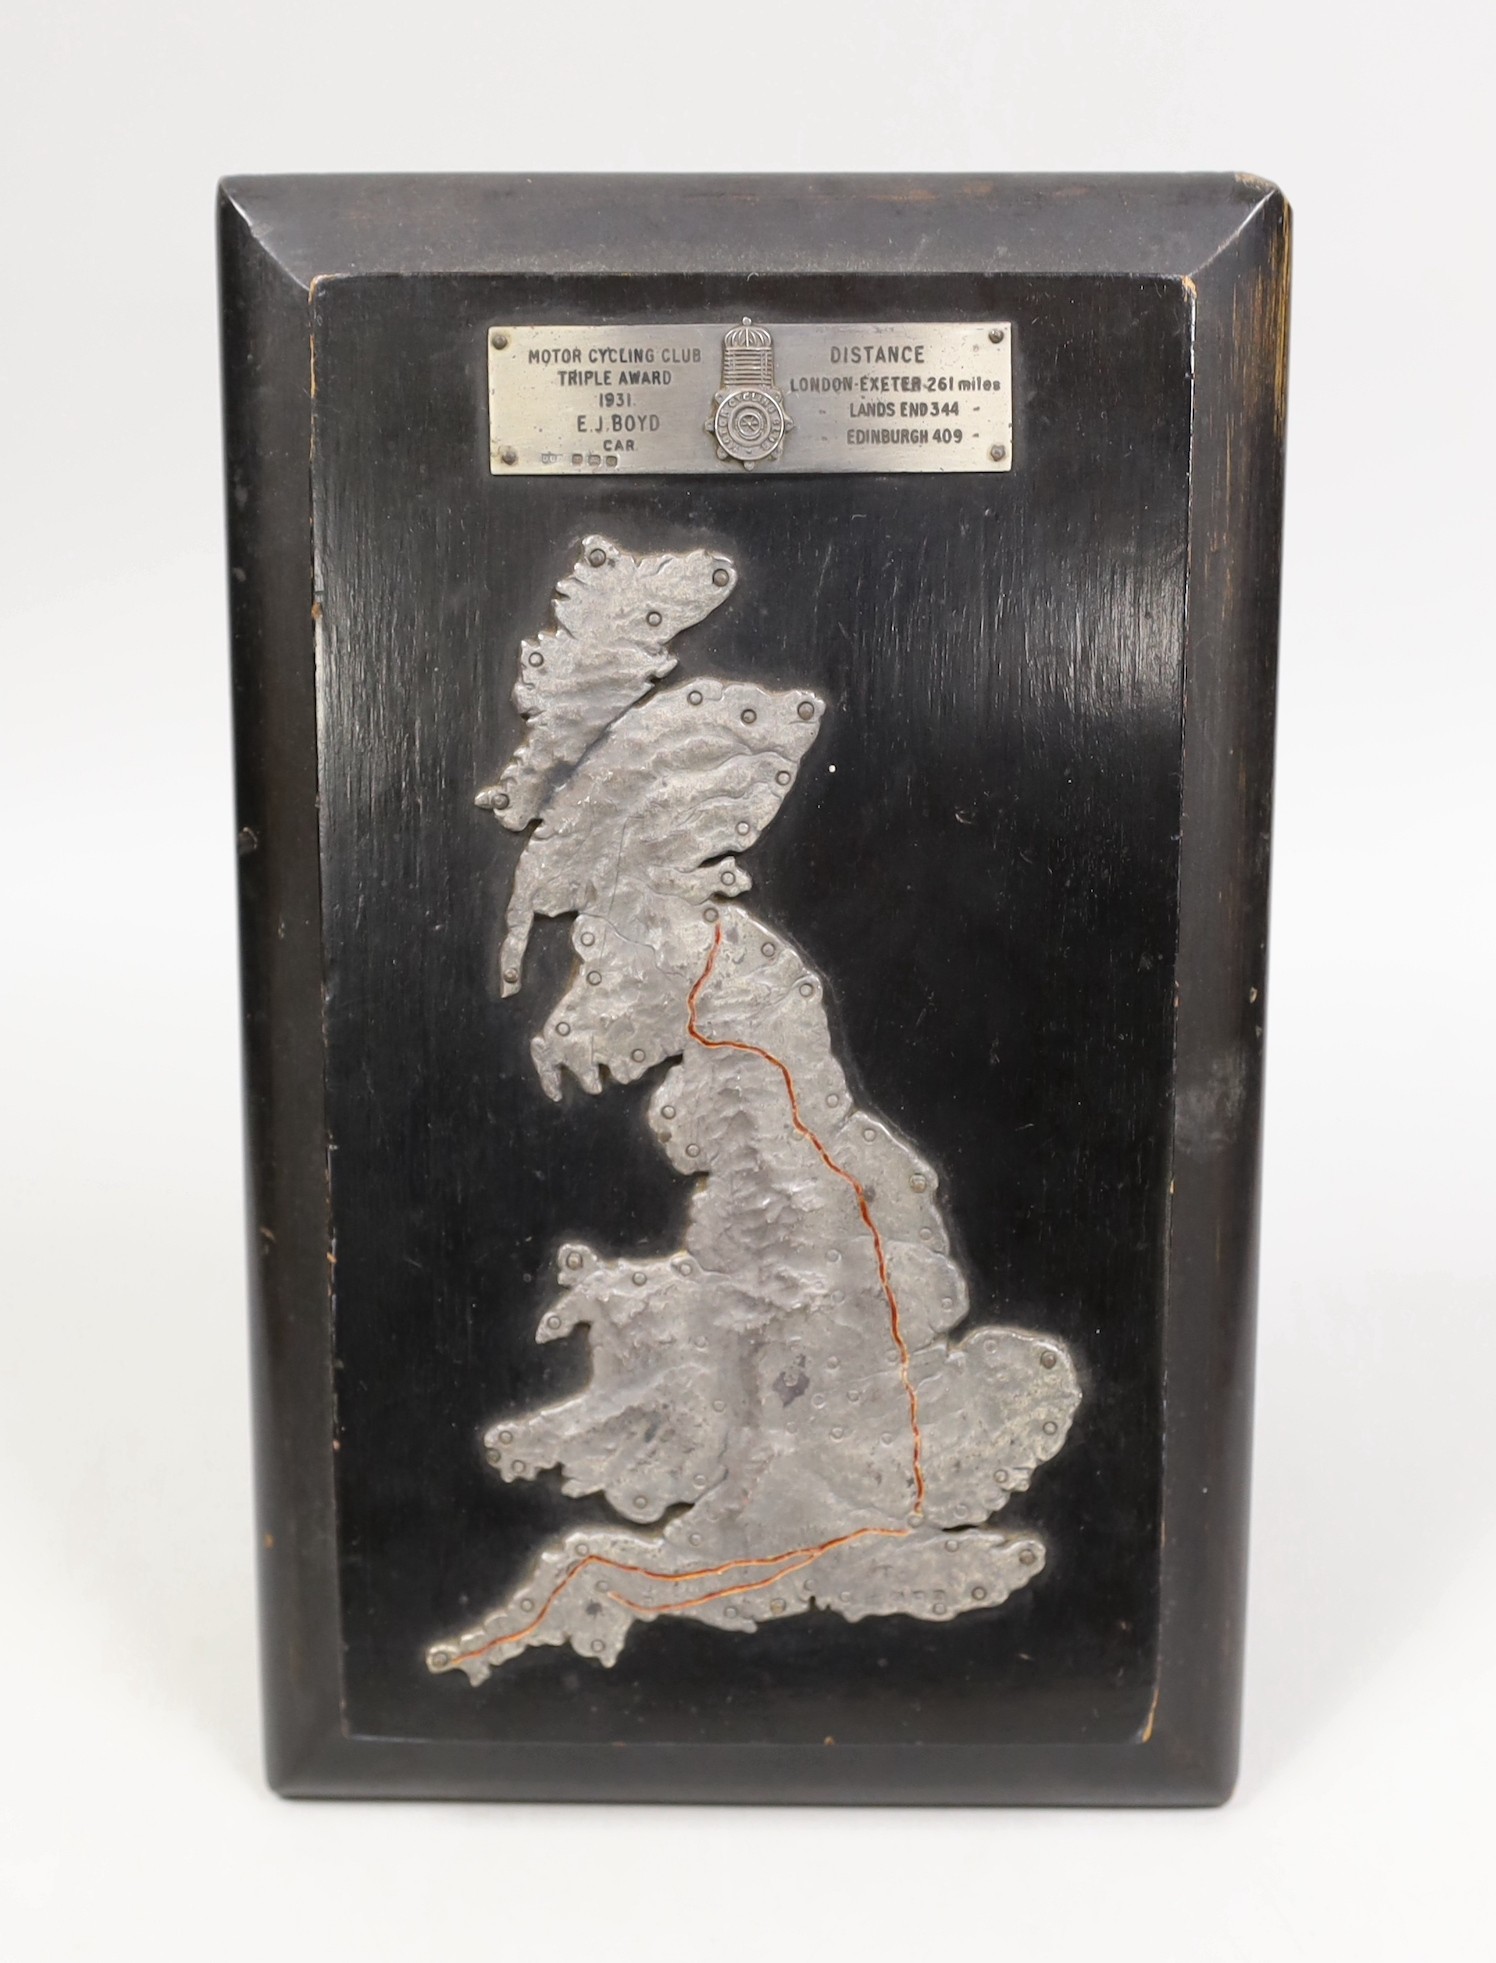 Motor Cycling memorabilia- A silver mounted map of UK showing winning route for Motor Cycling Club triple award 1931 to E. J. Boyd Distance London – Exeter 261 miles and Lands End 344 – Edinburgh 409 – , by Daniel George